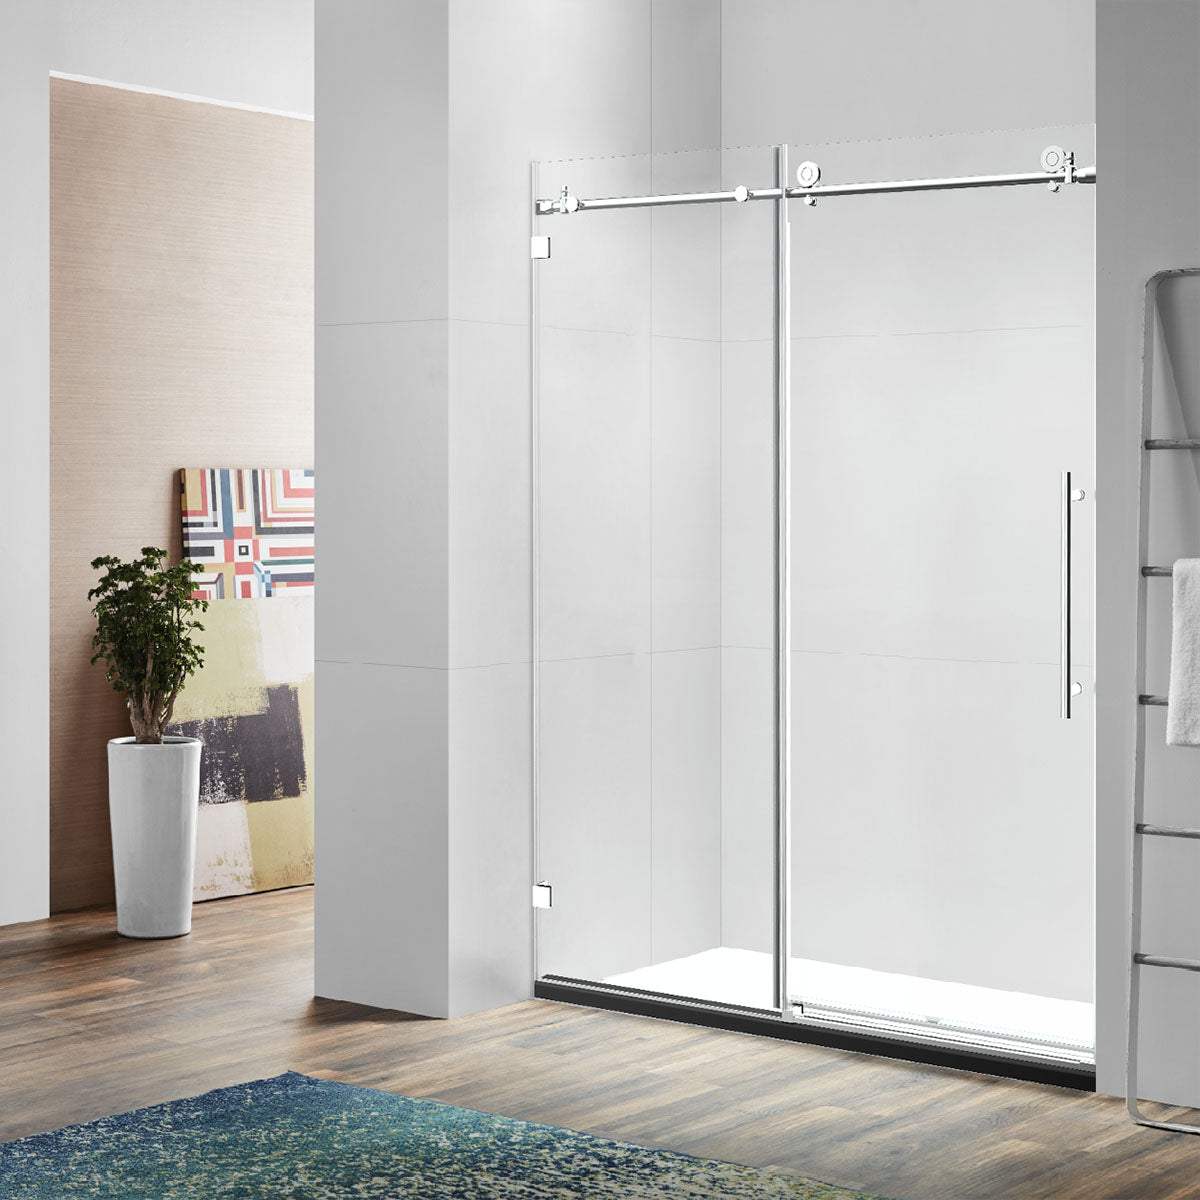 BR01 Joseph Frameless Single Sliding Shower Door with Klearteck Treatment (3/8" Thickness) (Brushed Nickel)